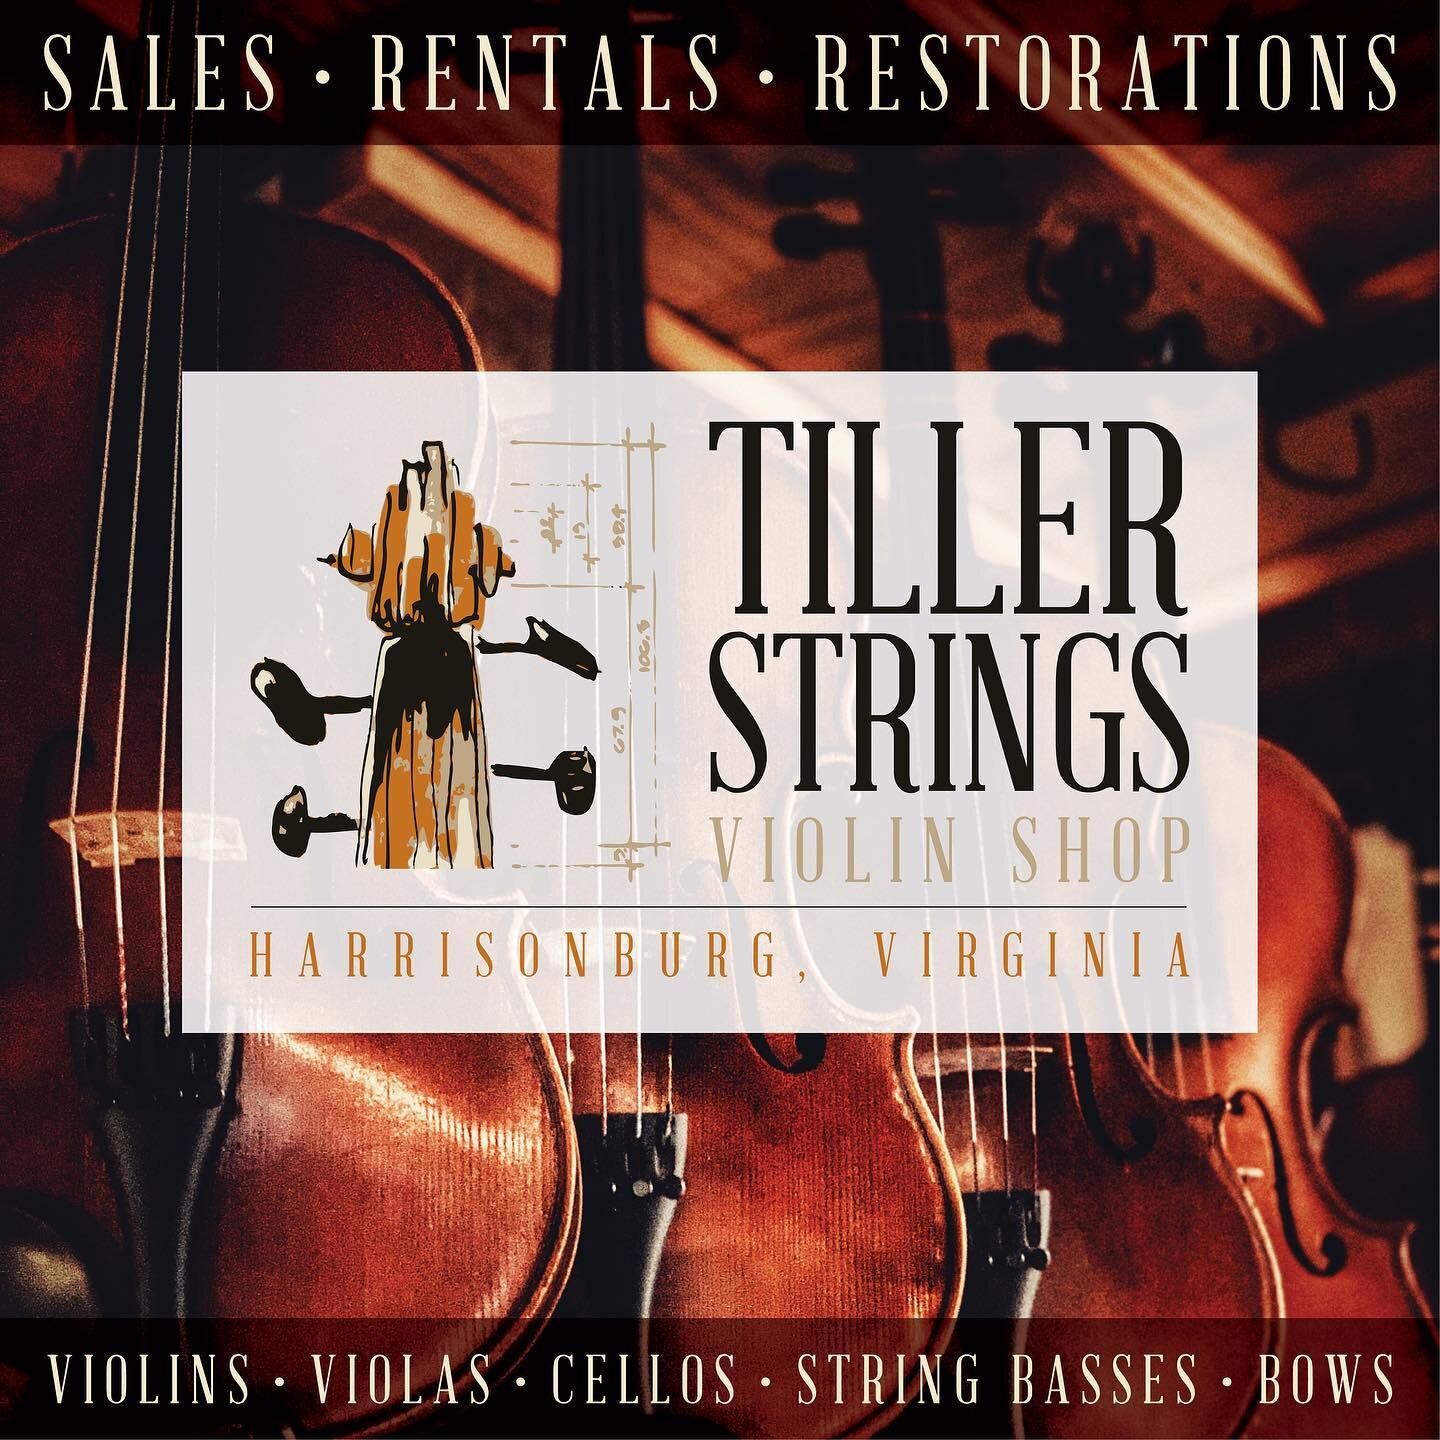 Happy New Year 🌟

Back in the #violinshop tomorrow. Appts are always best, give us a call or reach us at tillerstrings.com